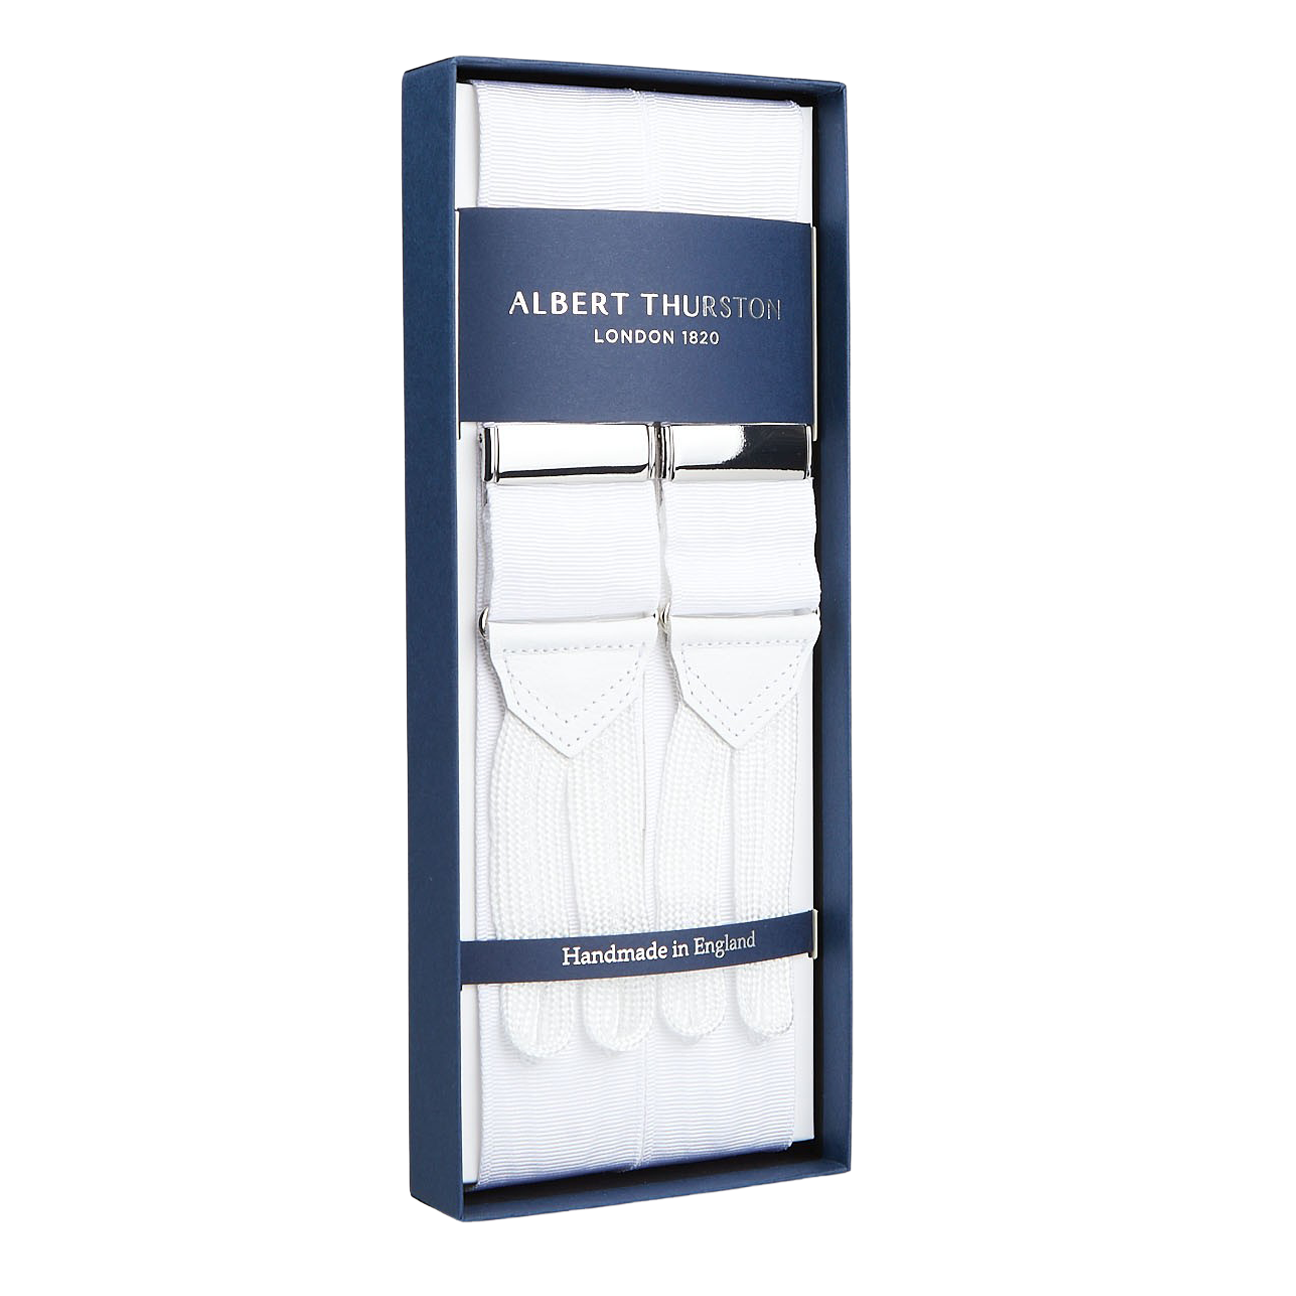 Elegant White James Bond Moiré 38 mm Braces by Albert Thurston, a black-tie accessory displayed in an open gift box.